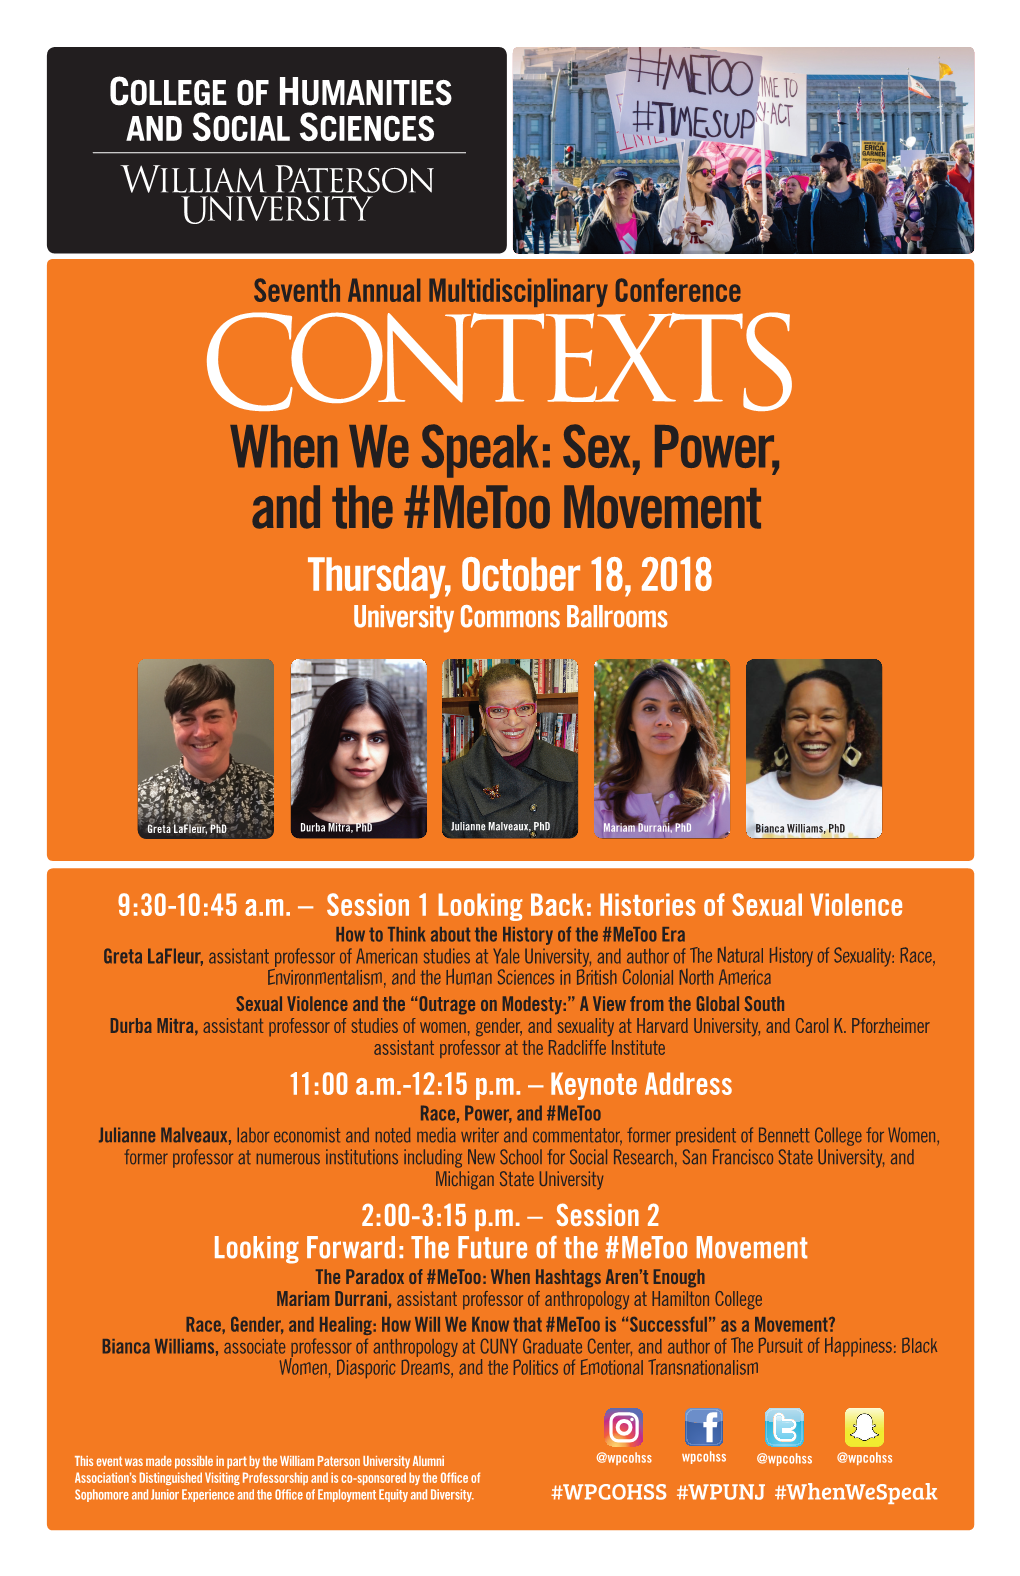 Sex, Power, and the #Metoo Movement Thursday, October 18, 2018 University Commons Ballrooms